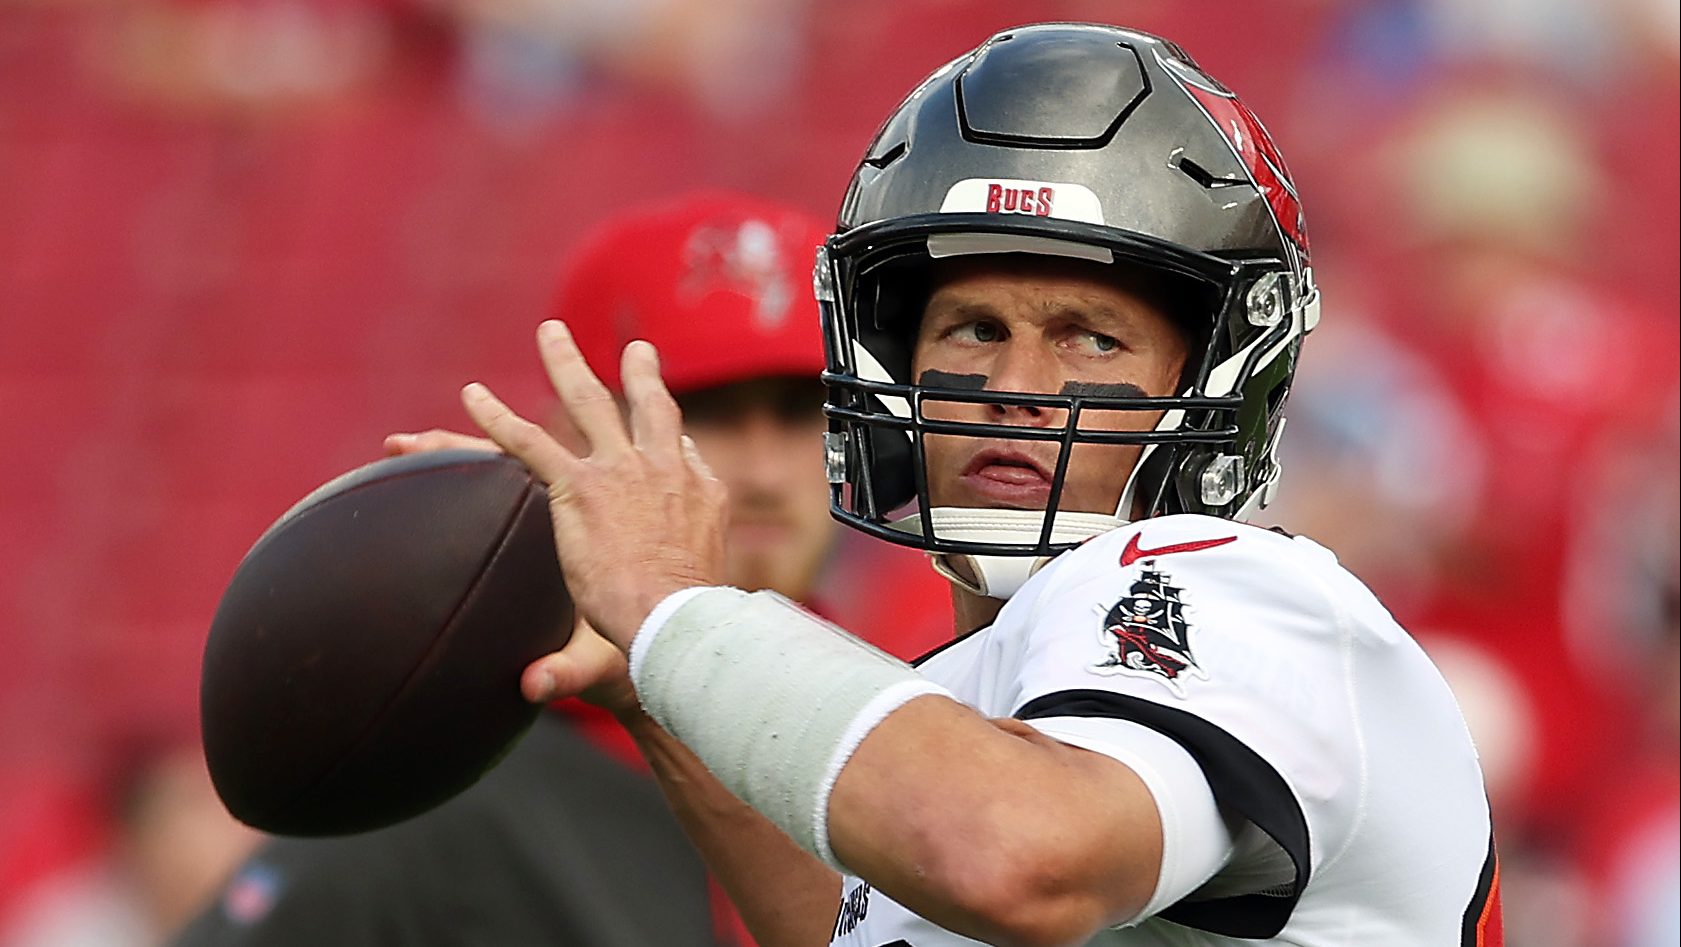 A Tom Brady Buccaneers jersey? Reported deal gives QB's apparel